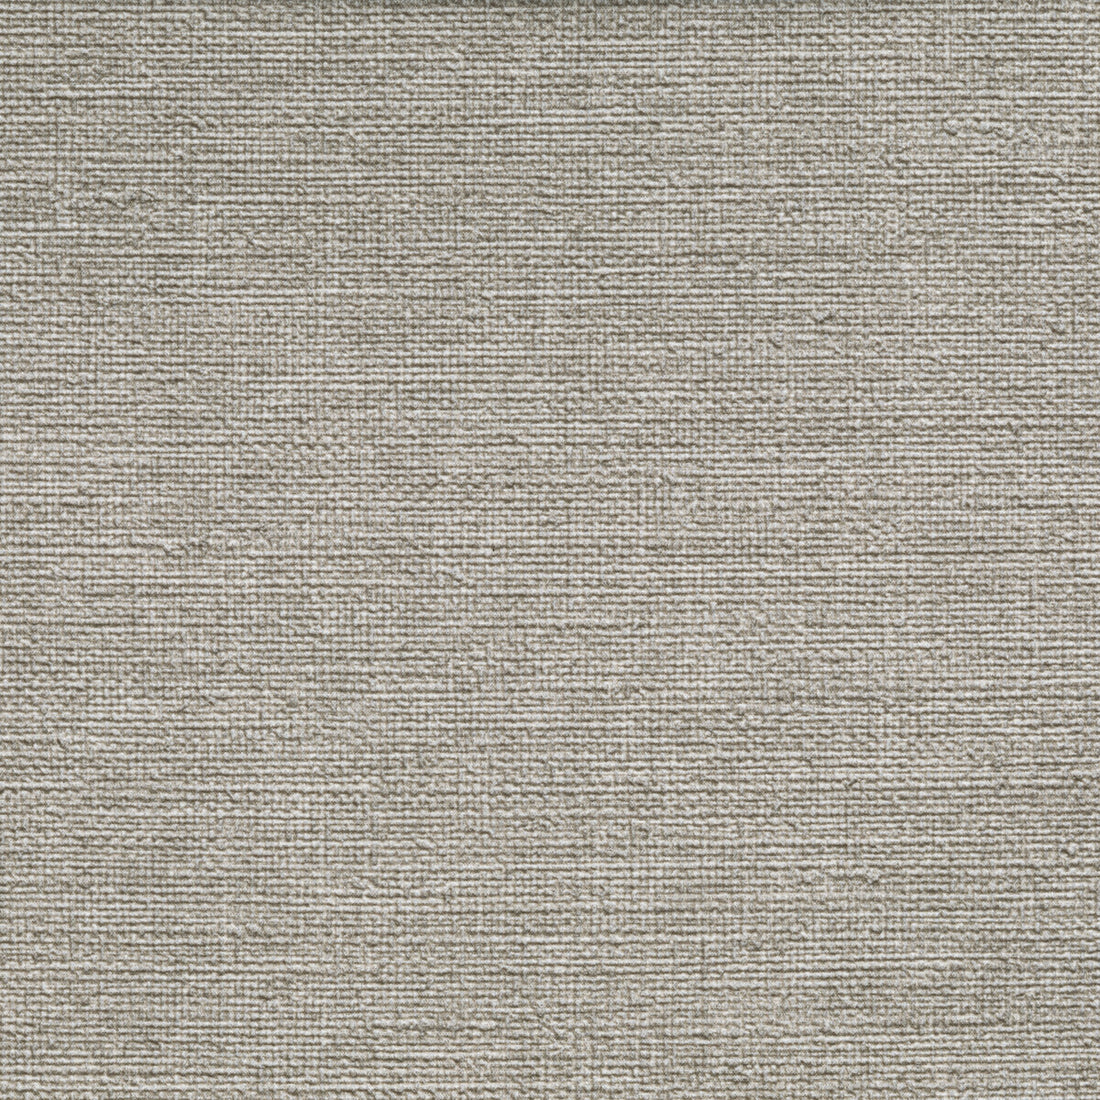 Caslin fabric in storm color - pattern CASLIN.121.0 - by Kravet Contract in the Foundations / Value collection